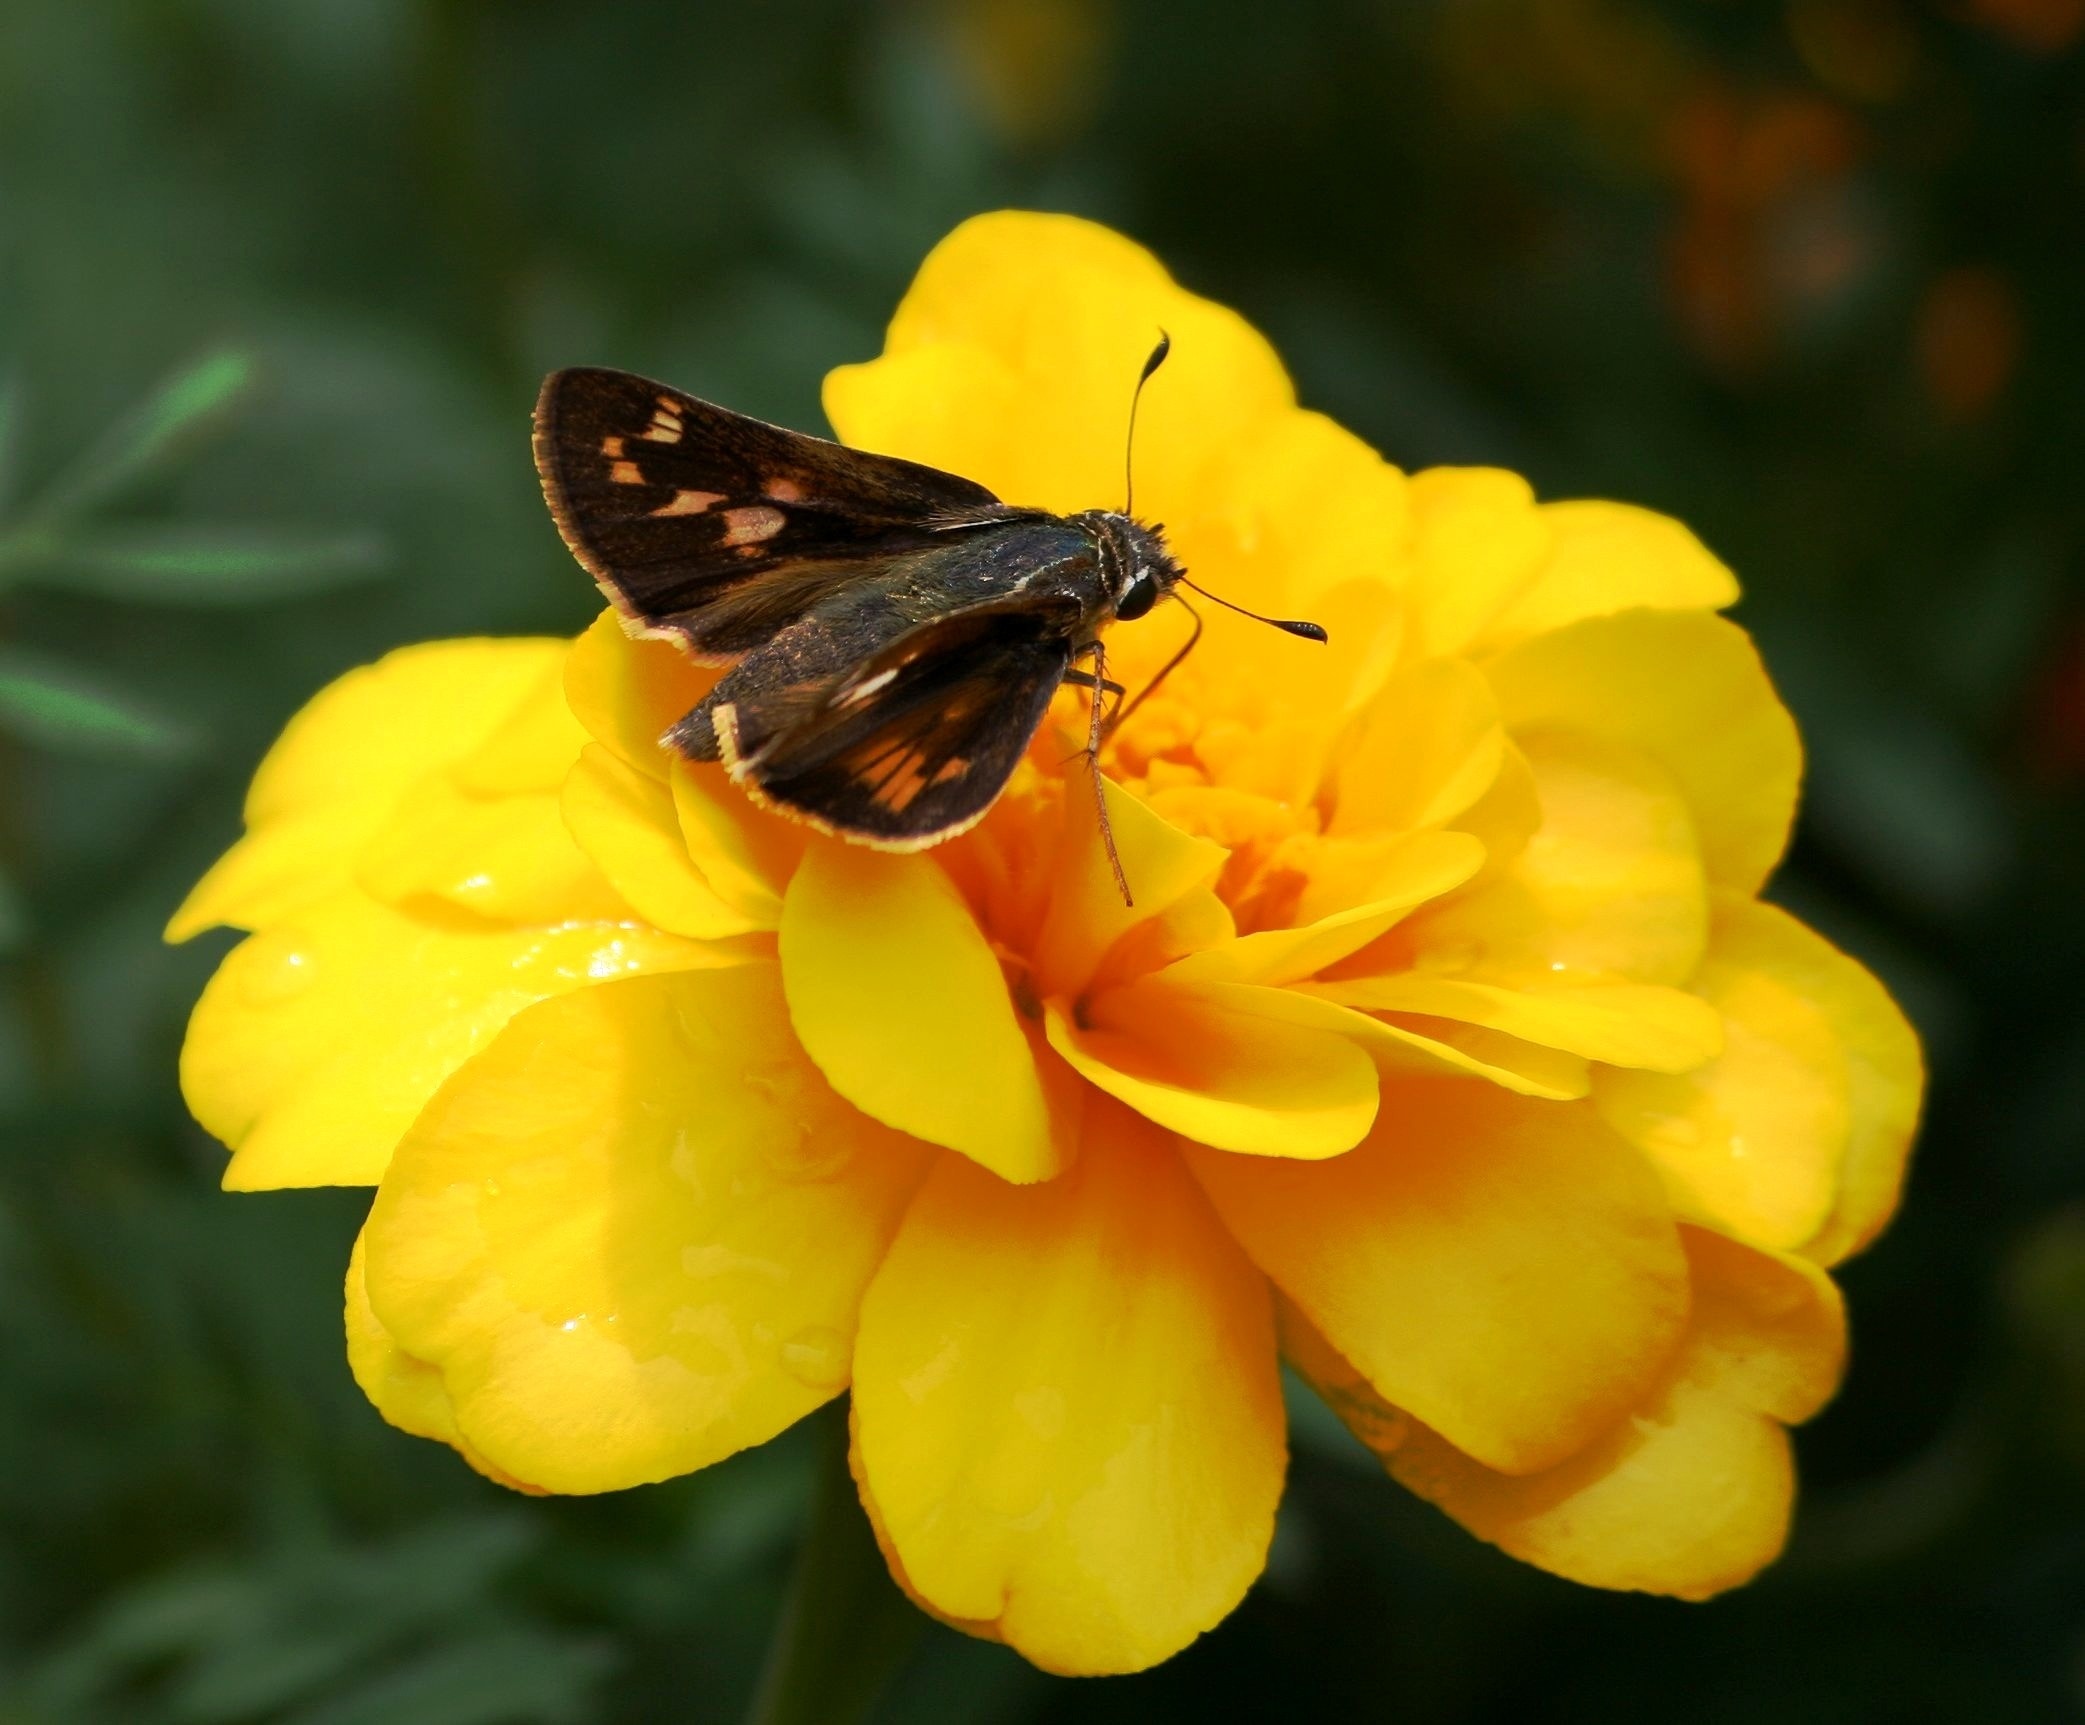 Small Brown, Insect, Butterfly, flower, yellow